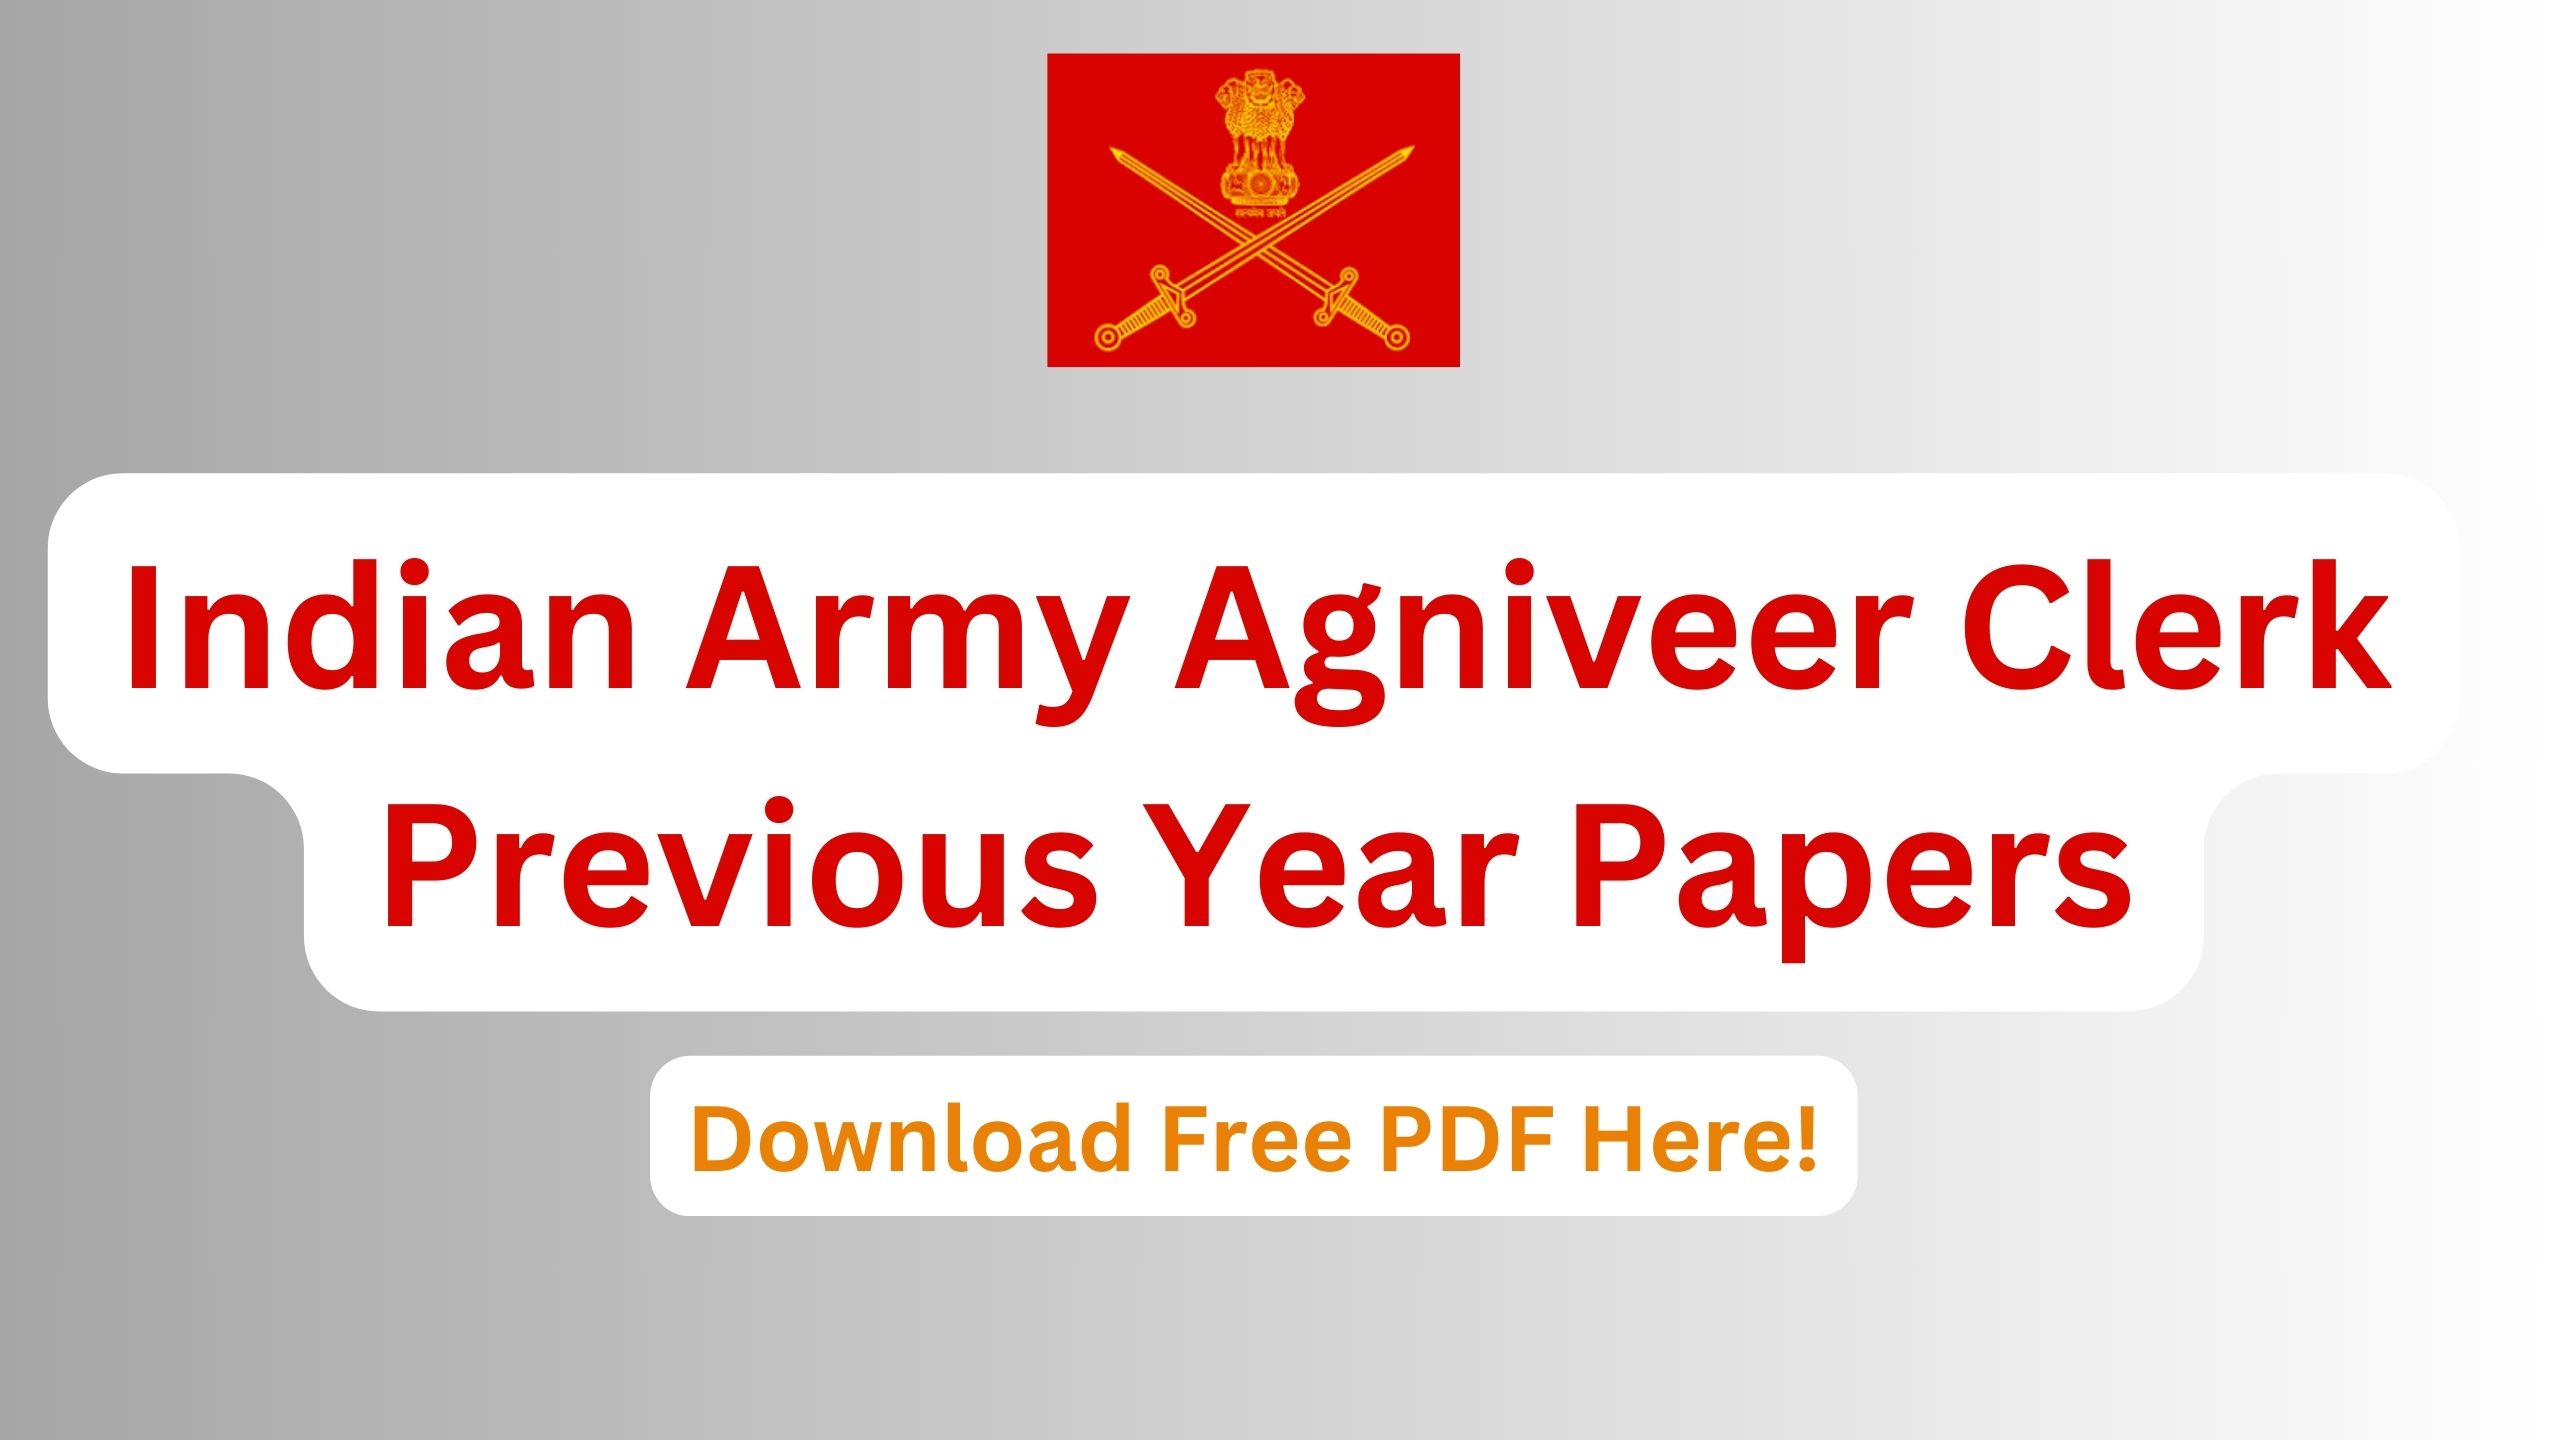 Indian Army Agniveer Clerk Previous Year Papers